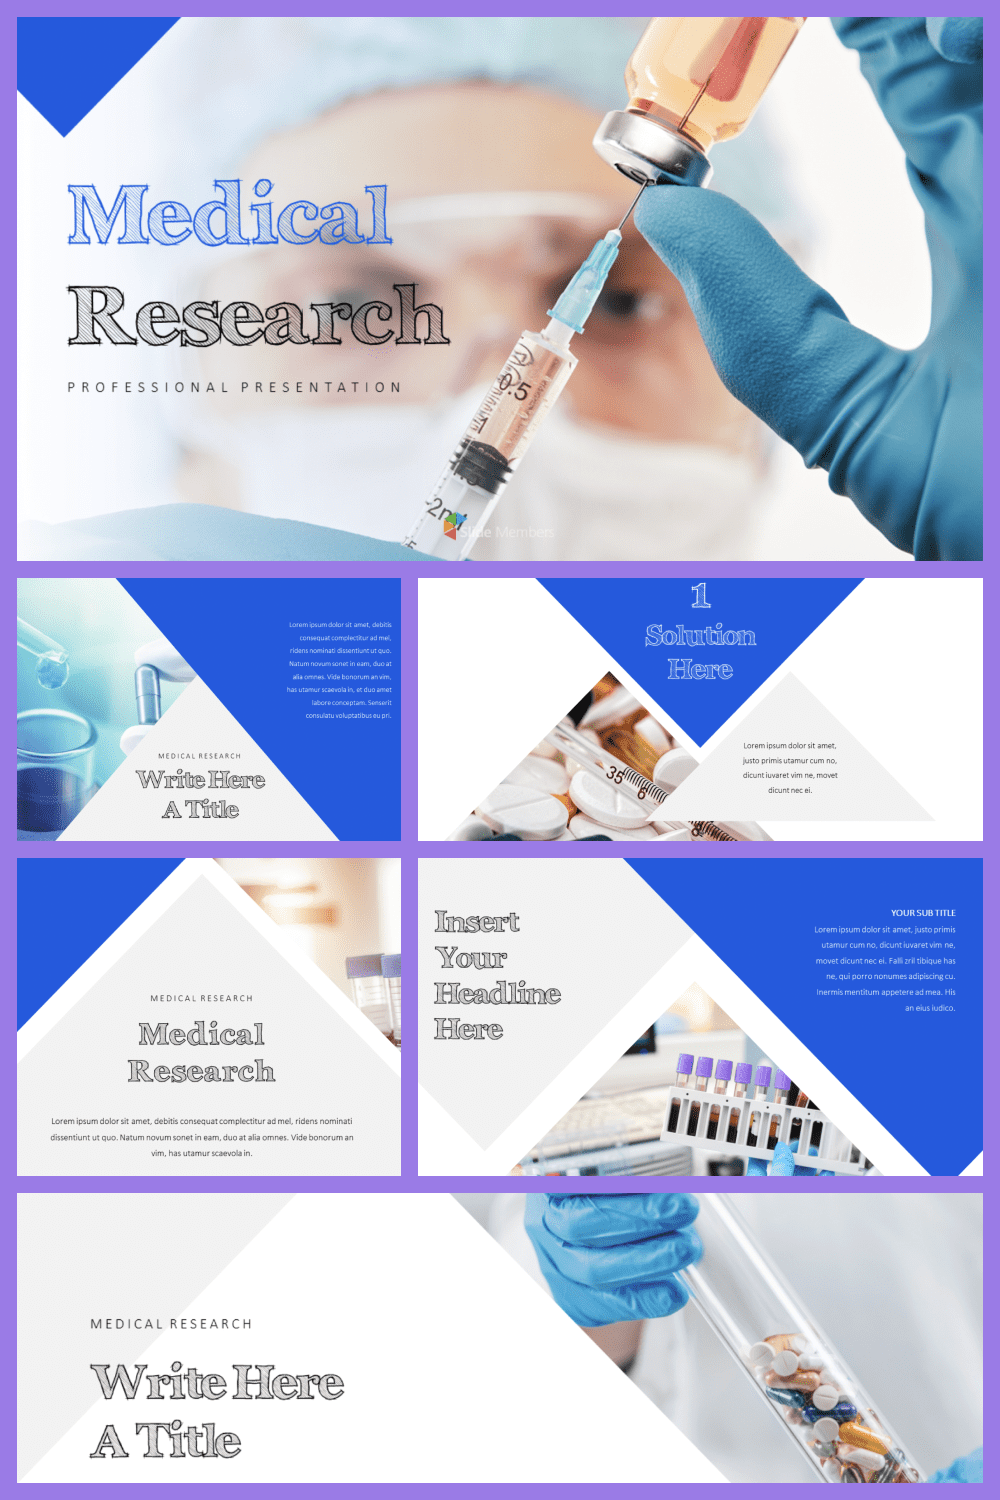 Medical research powerpoint presentations samples.